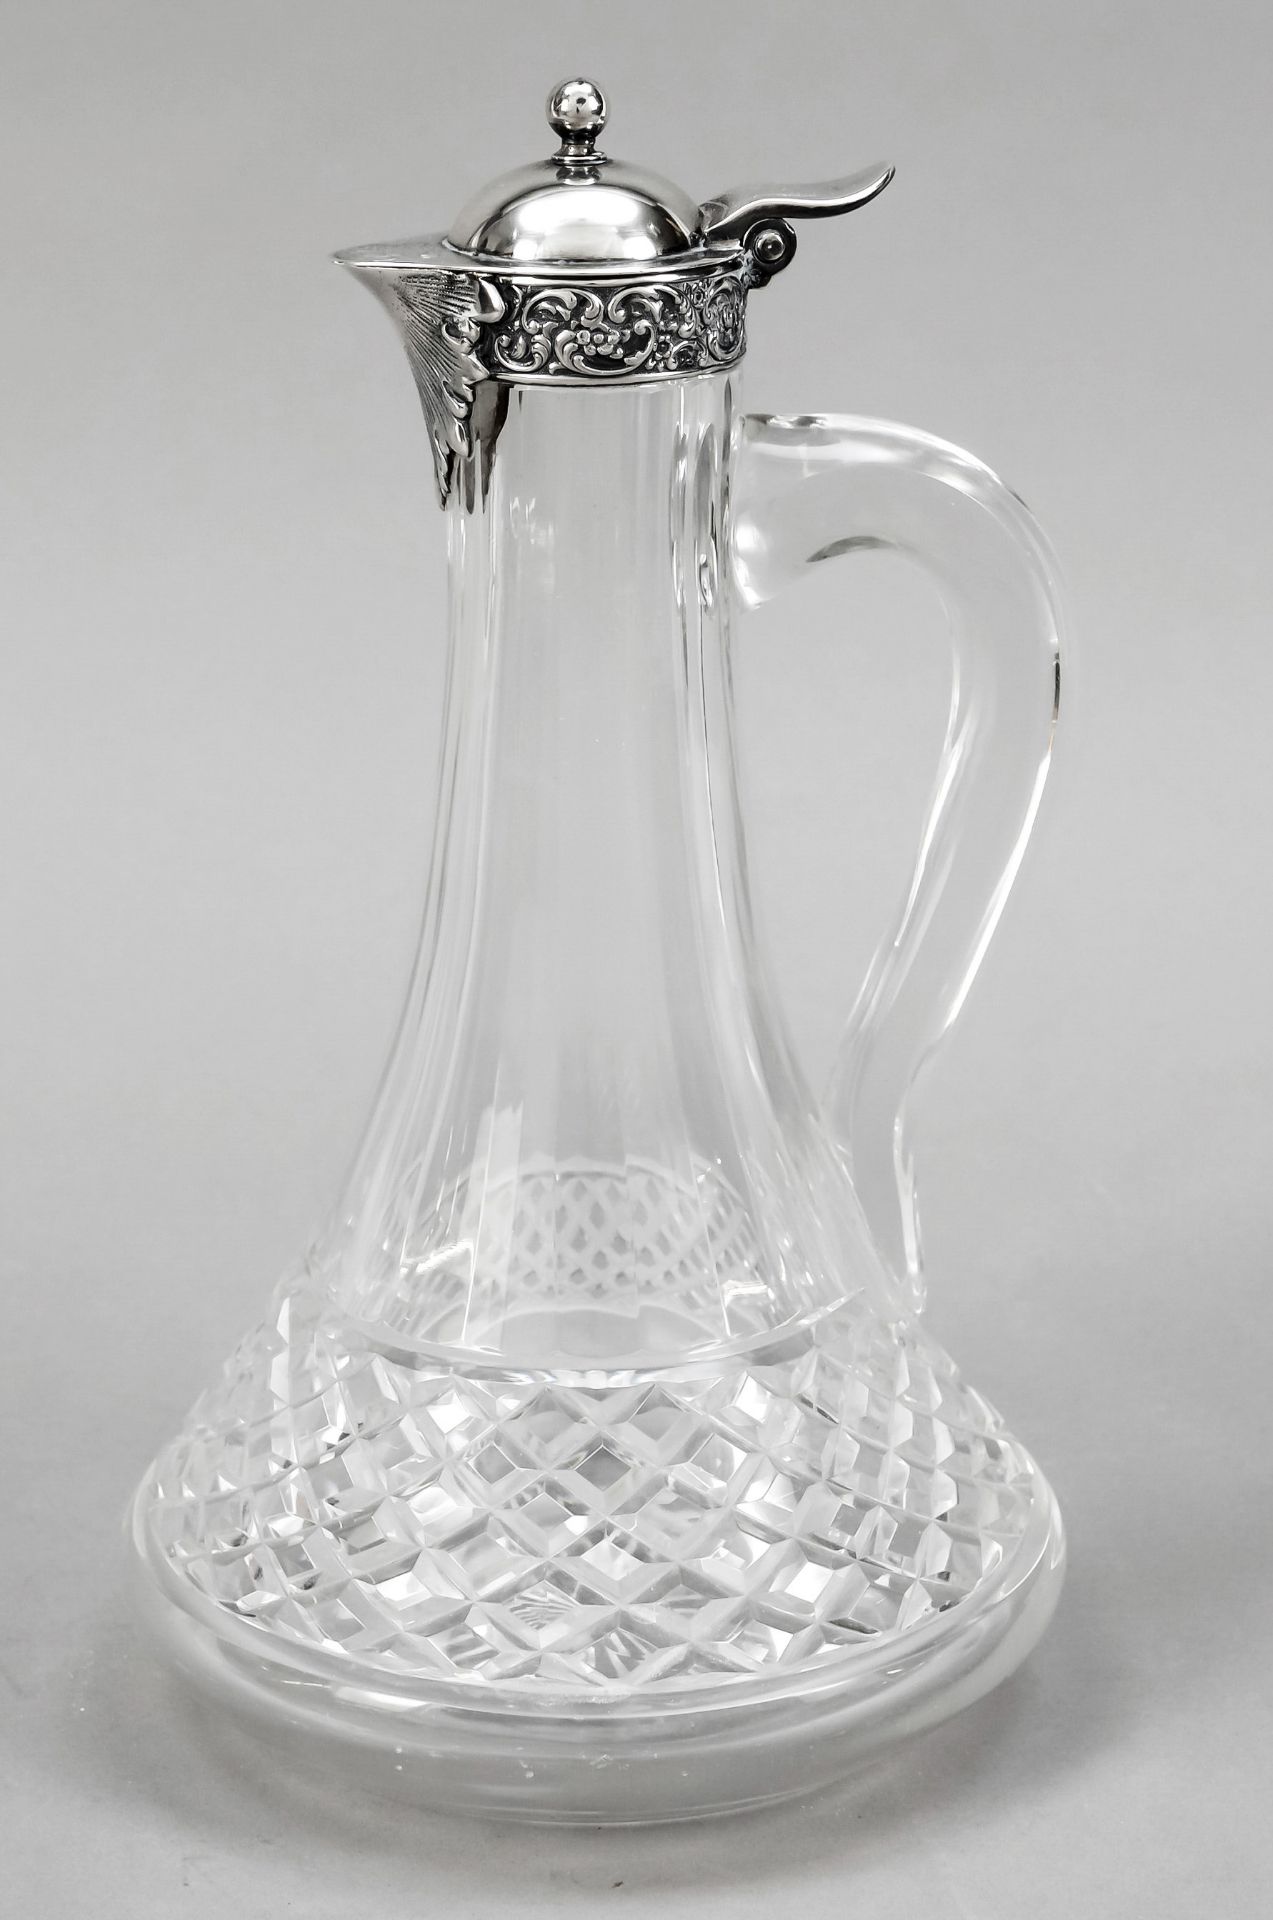 Carafe with silver mounting, USA, c. 1900, maker‘s mark Tiffany & Co., New York, Sterling silver